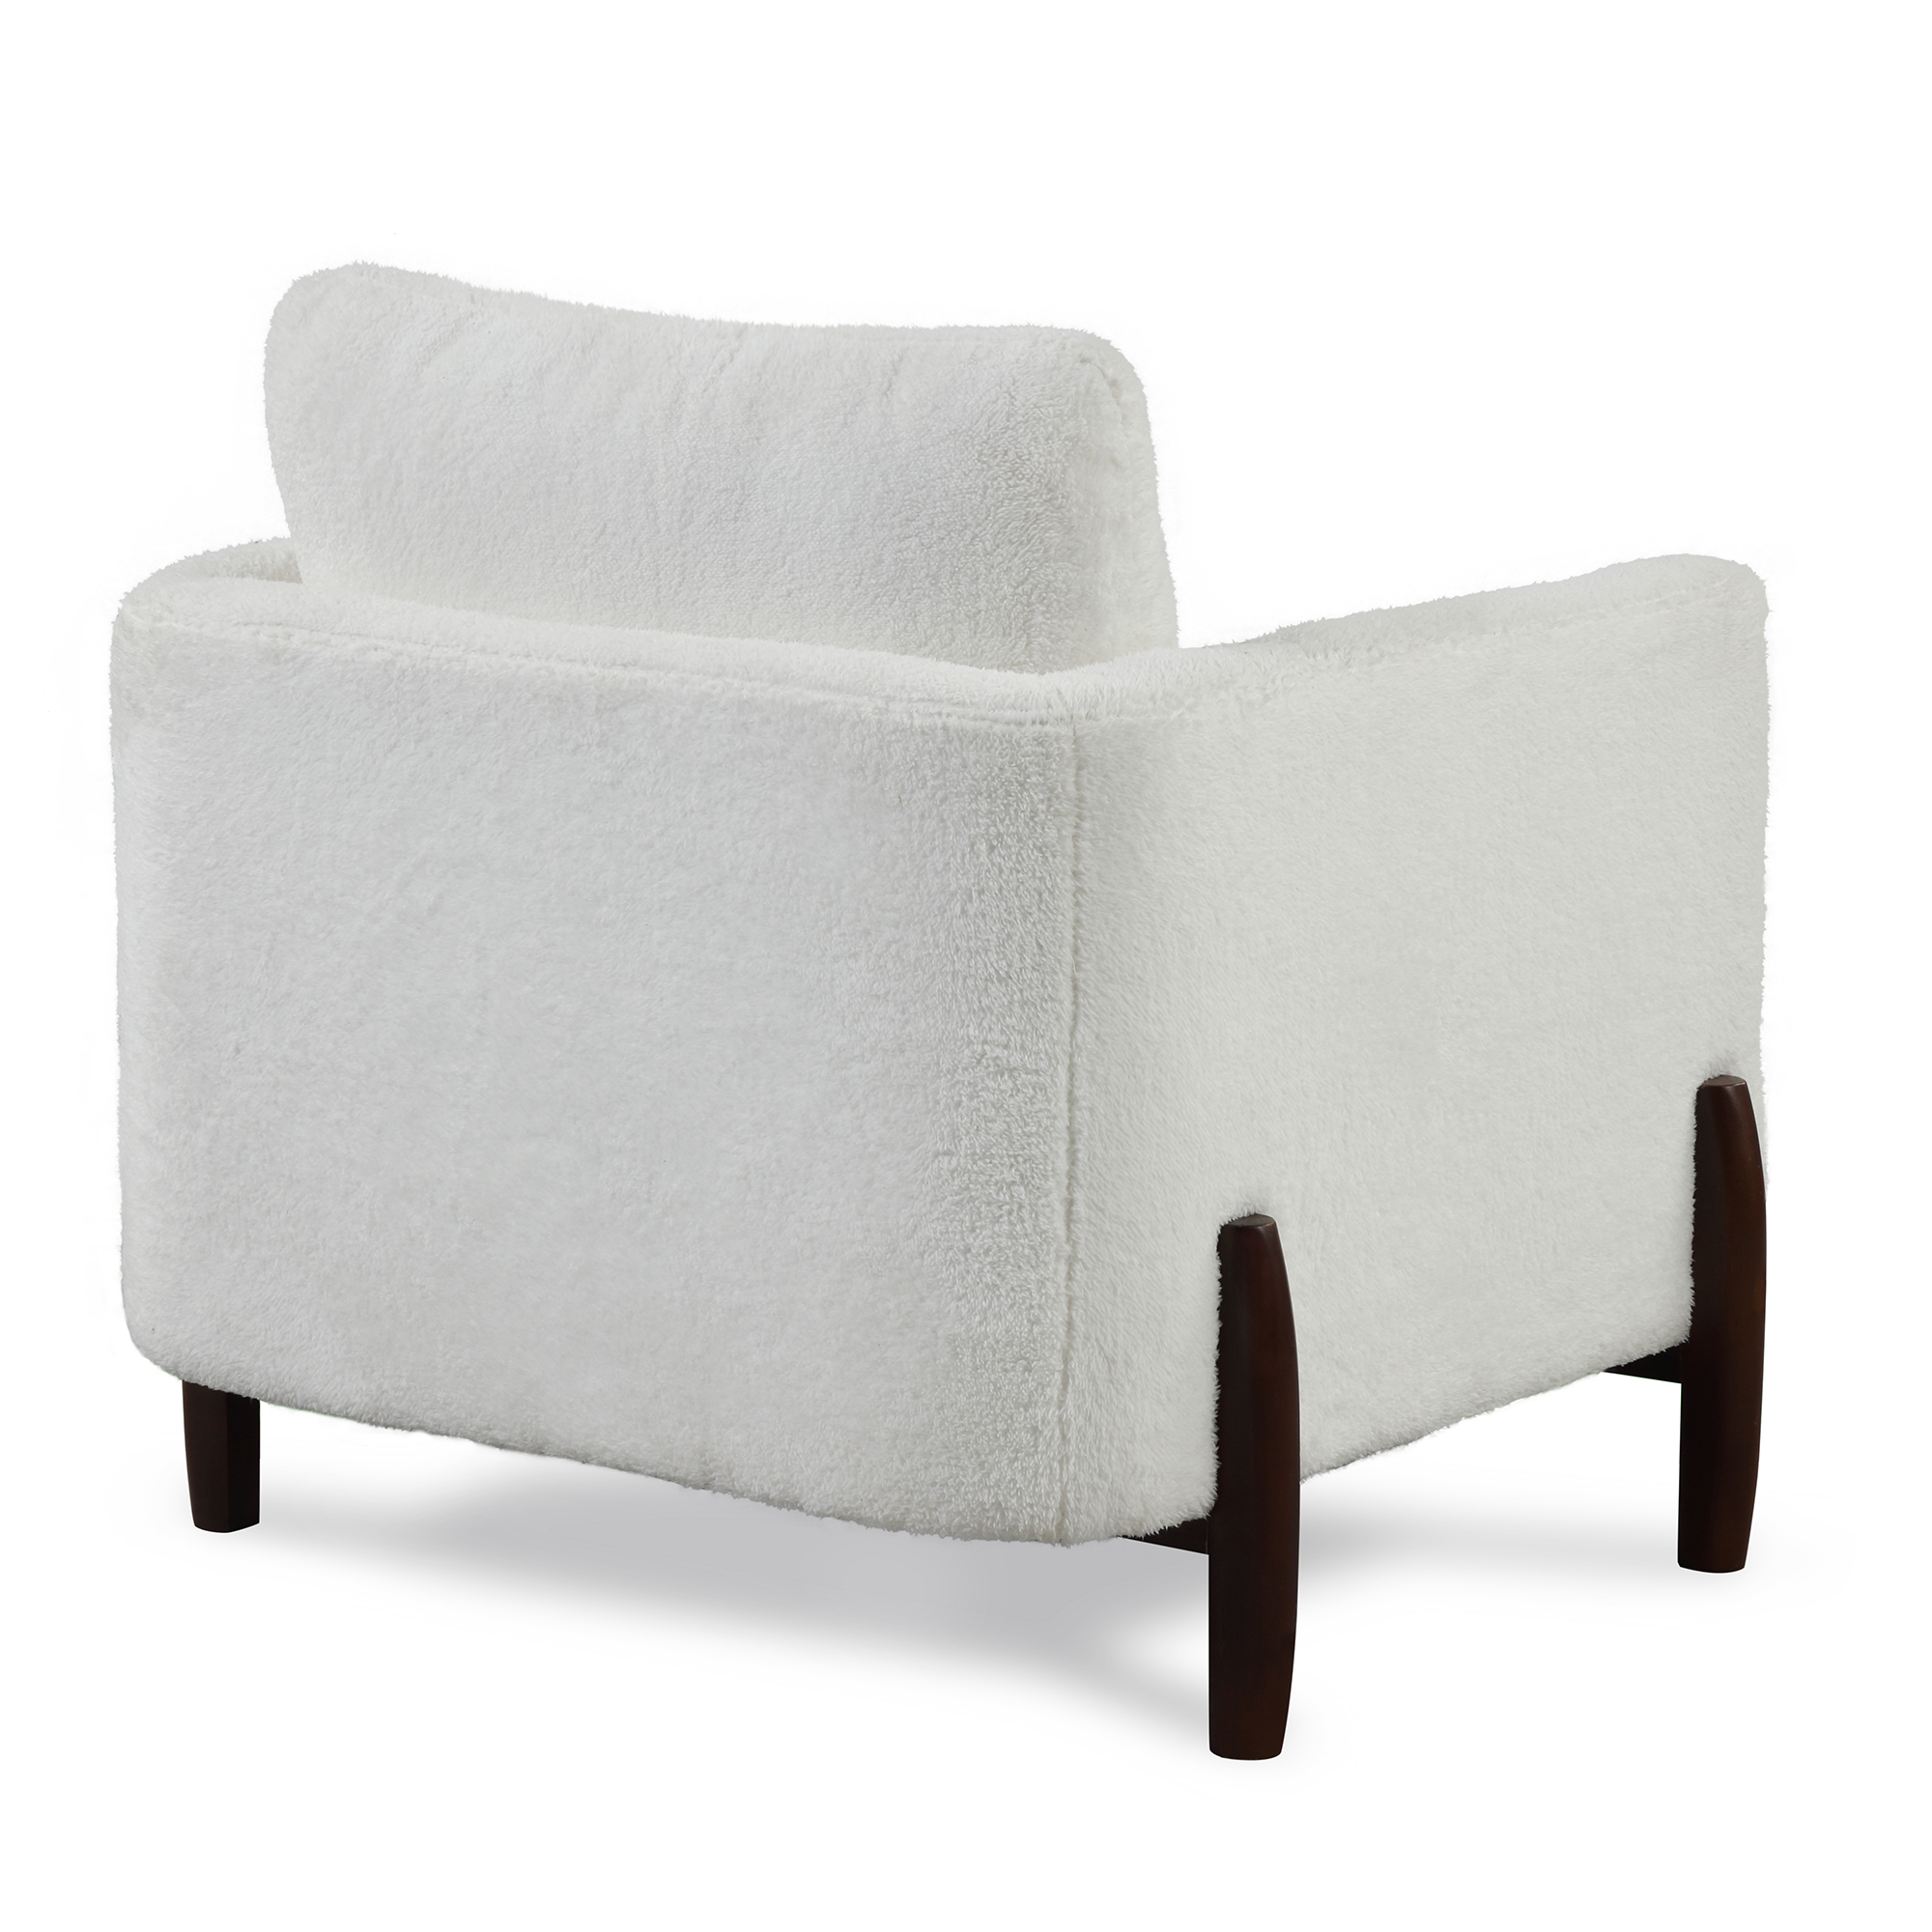 Desert Fields Sherpa Chair with Wood Legs - image 4 of 7